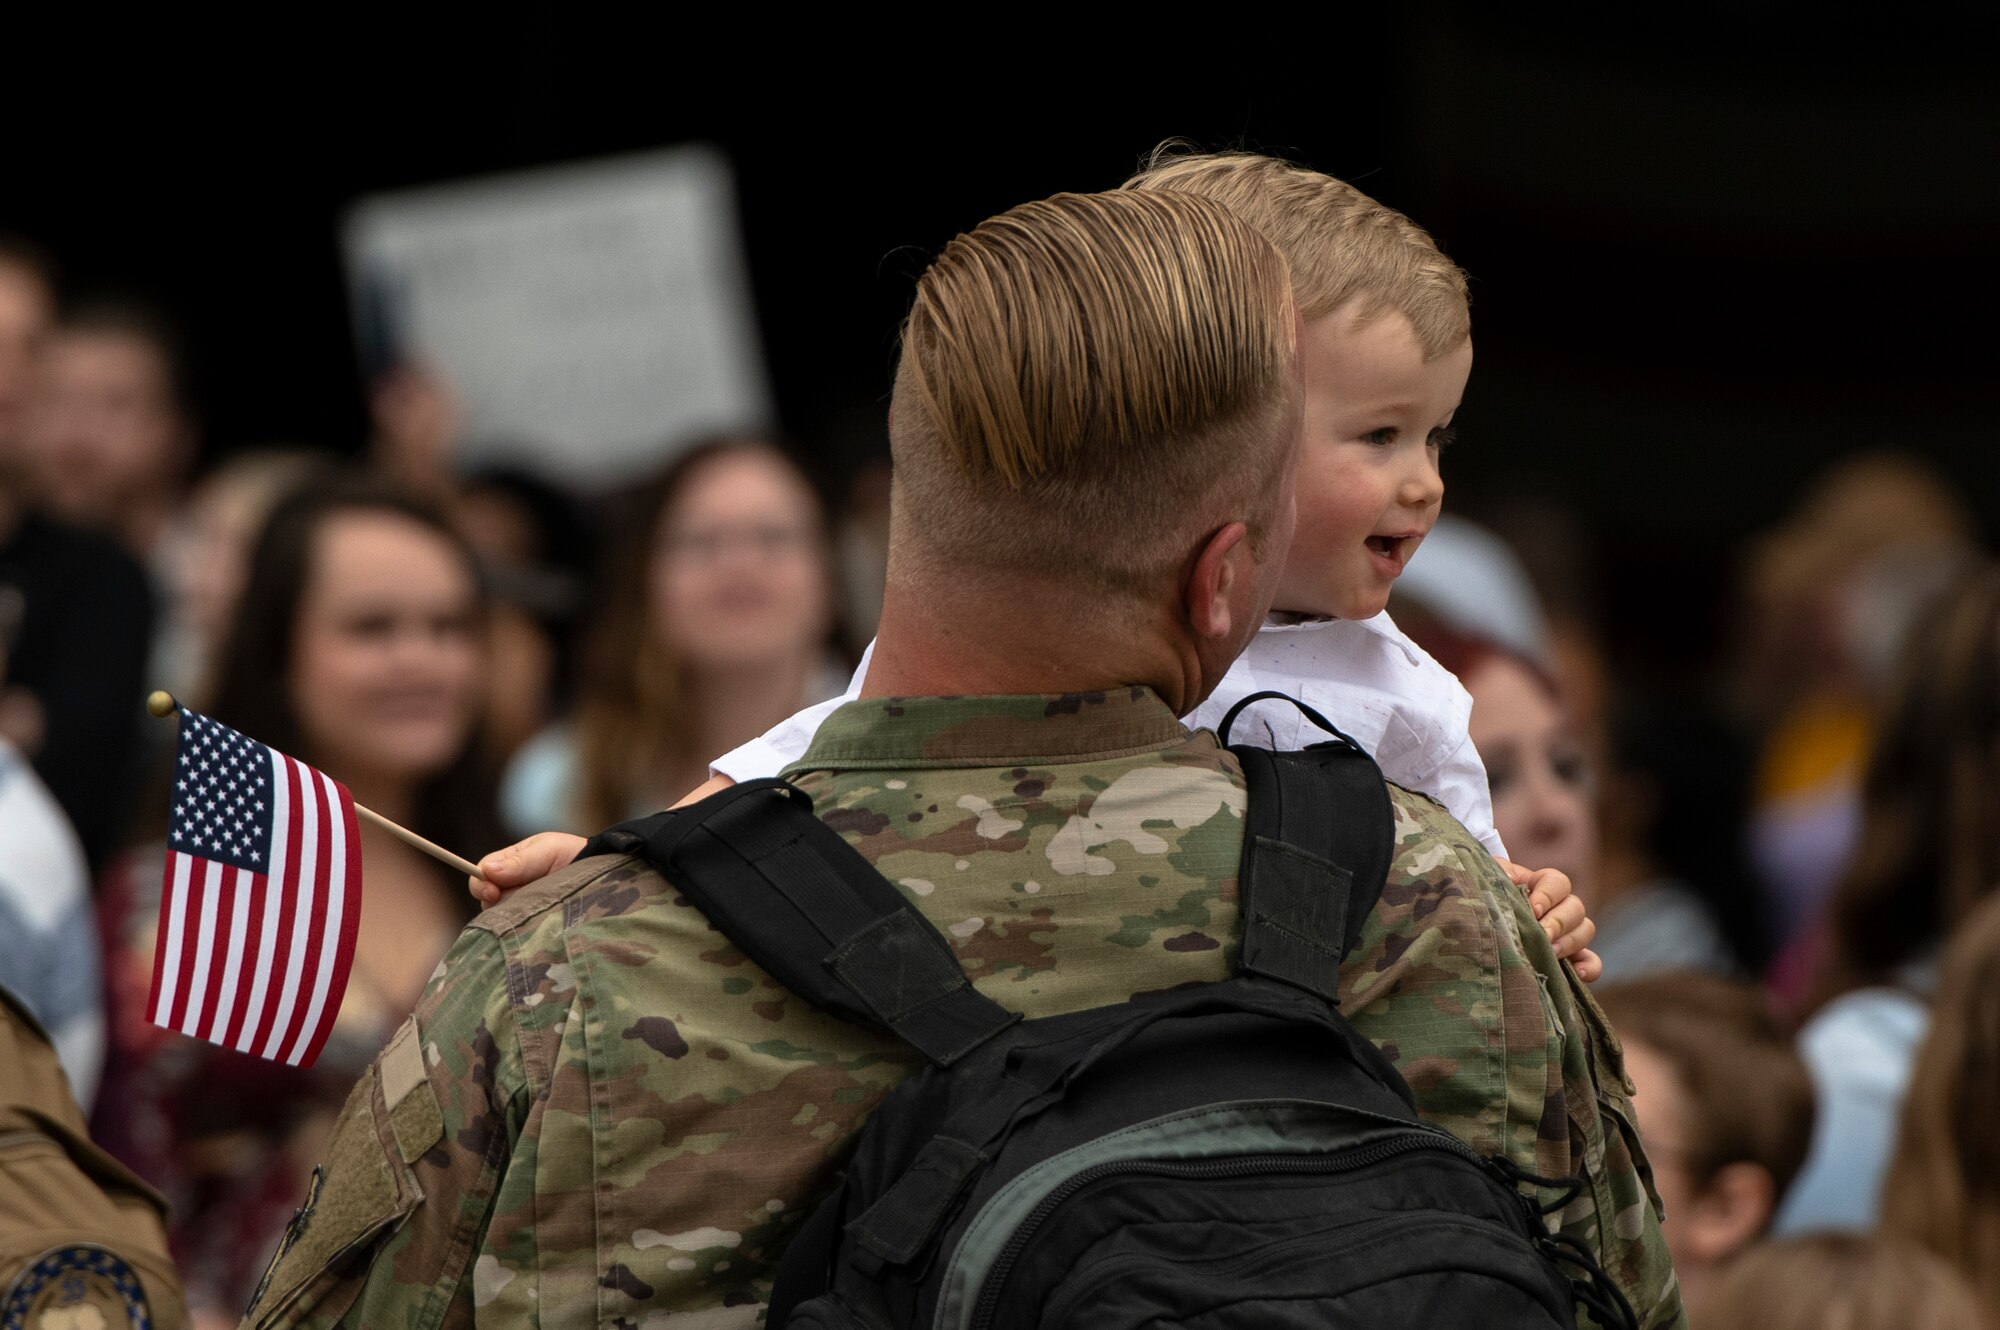 U.S. Air Force Tech. Sgt. Austin Gorbet, 20th Aircraft Maintenance Squadron weapon load crew chief, embraces his son after returning from a deployment to an undisclosed location in Southwest Asia to Shaw Air Force Base, S.C., May 4, 2019.